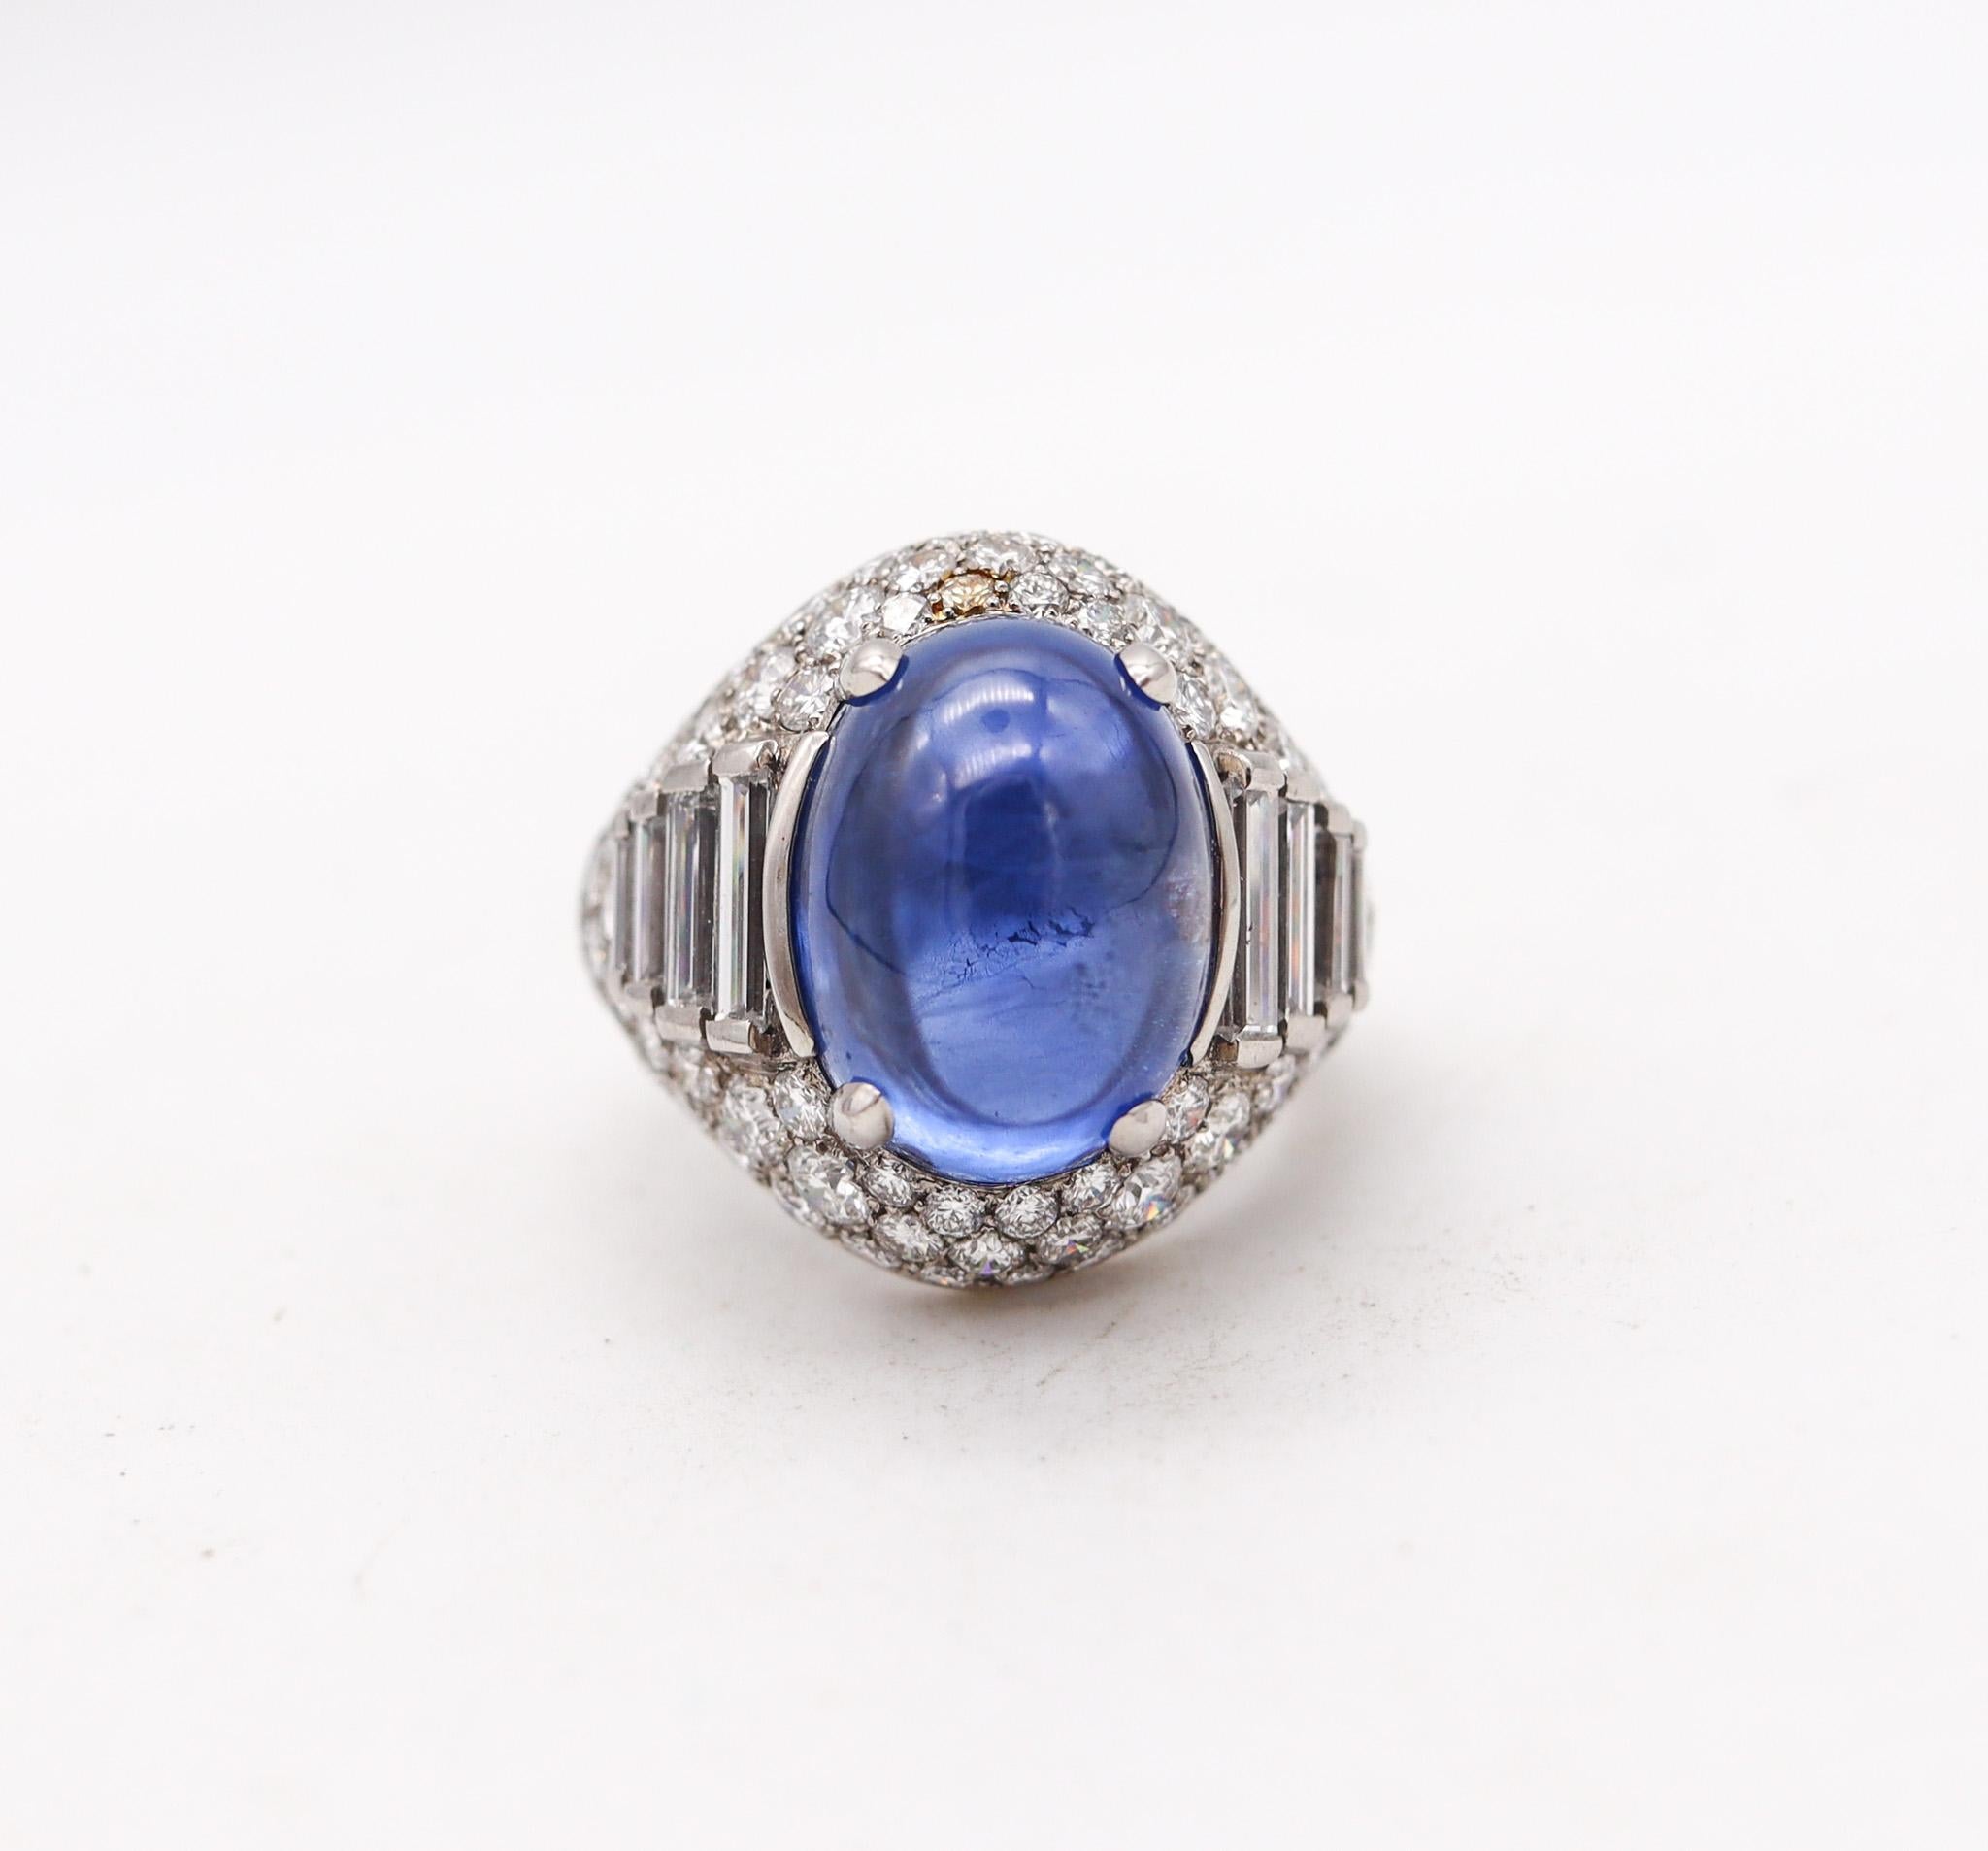 Modernist Bvlgari Trombino Cocktail Ring In Platinum With 21.88 Ctw In Diamonds & Sapphire For Sale